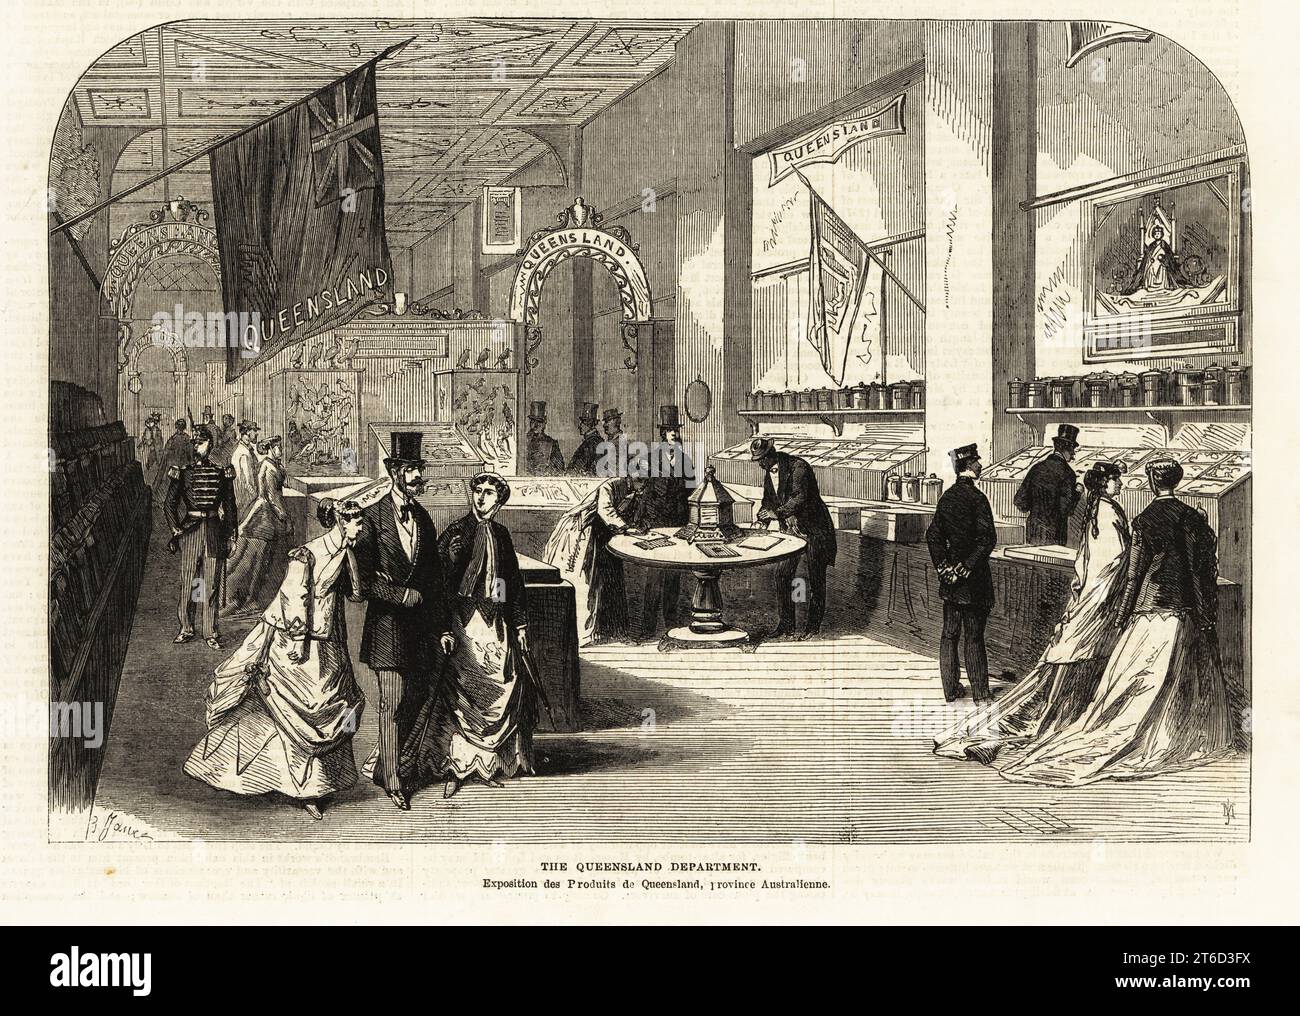 Visitors looking at the cases of birds, products, and export items in the Queensland Department, Australia, at the Paris Exposition Universelle, 1867. Walls decorated with flags and a painting of Queen Victoria. Woodcut engraving by JM from the Supplement to the Illustrated London News, London, June 8, 1867. Stock Photo